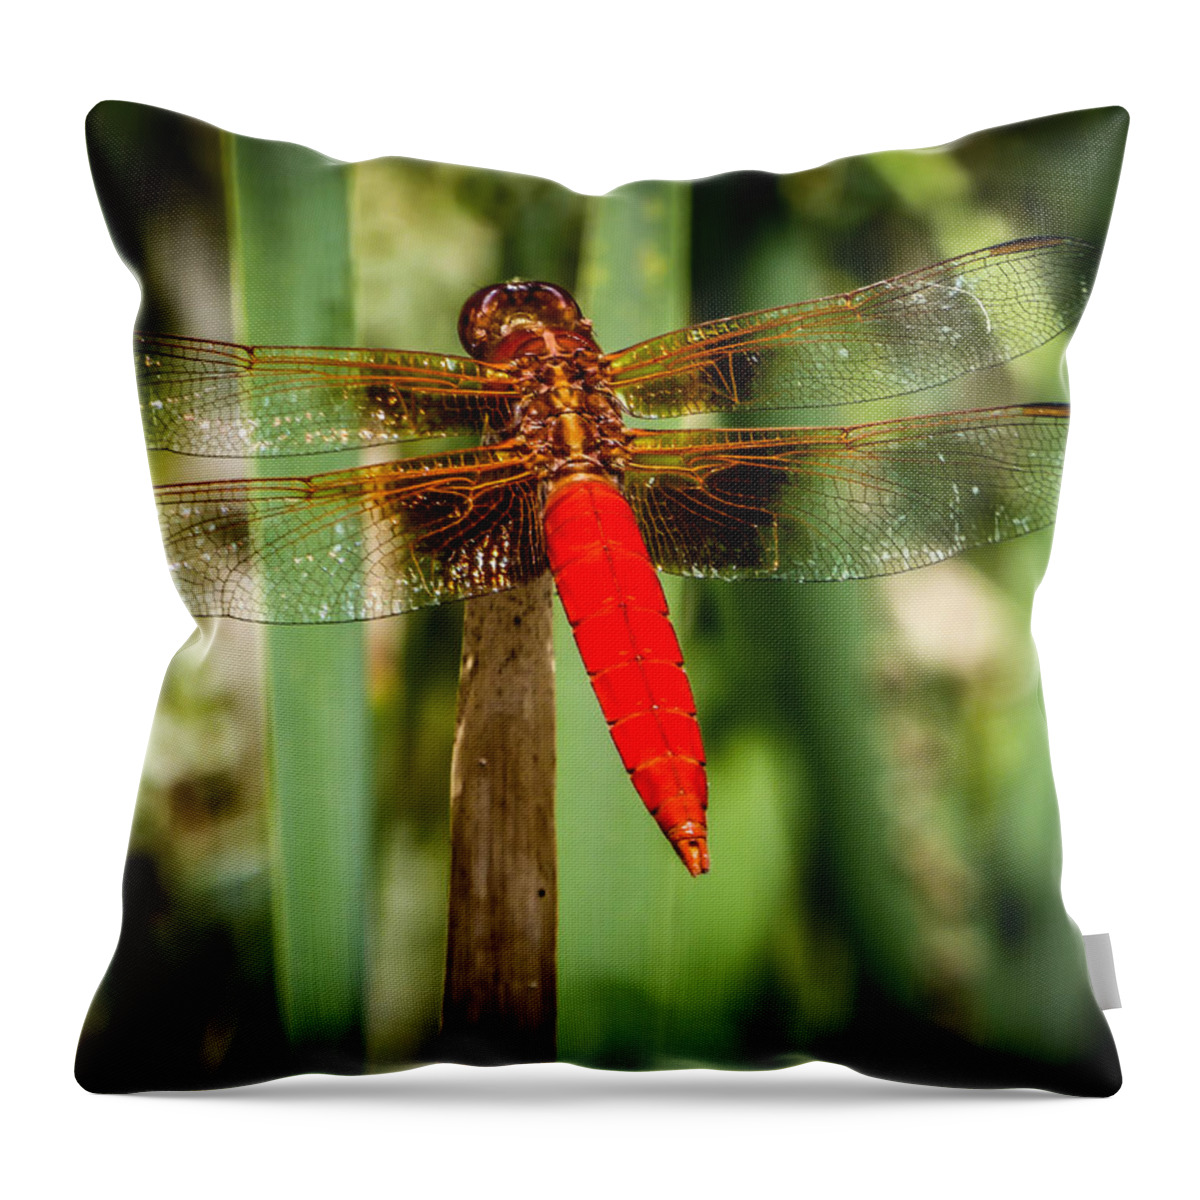 Dragonfly Throw Pillow featuring the photograph Red Dragonfly by Pamela Newcomb